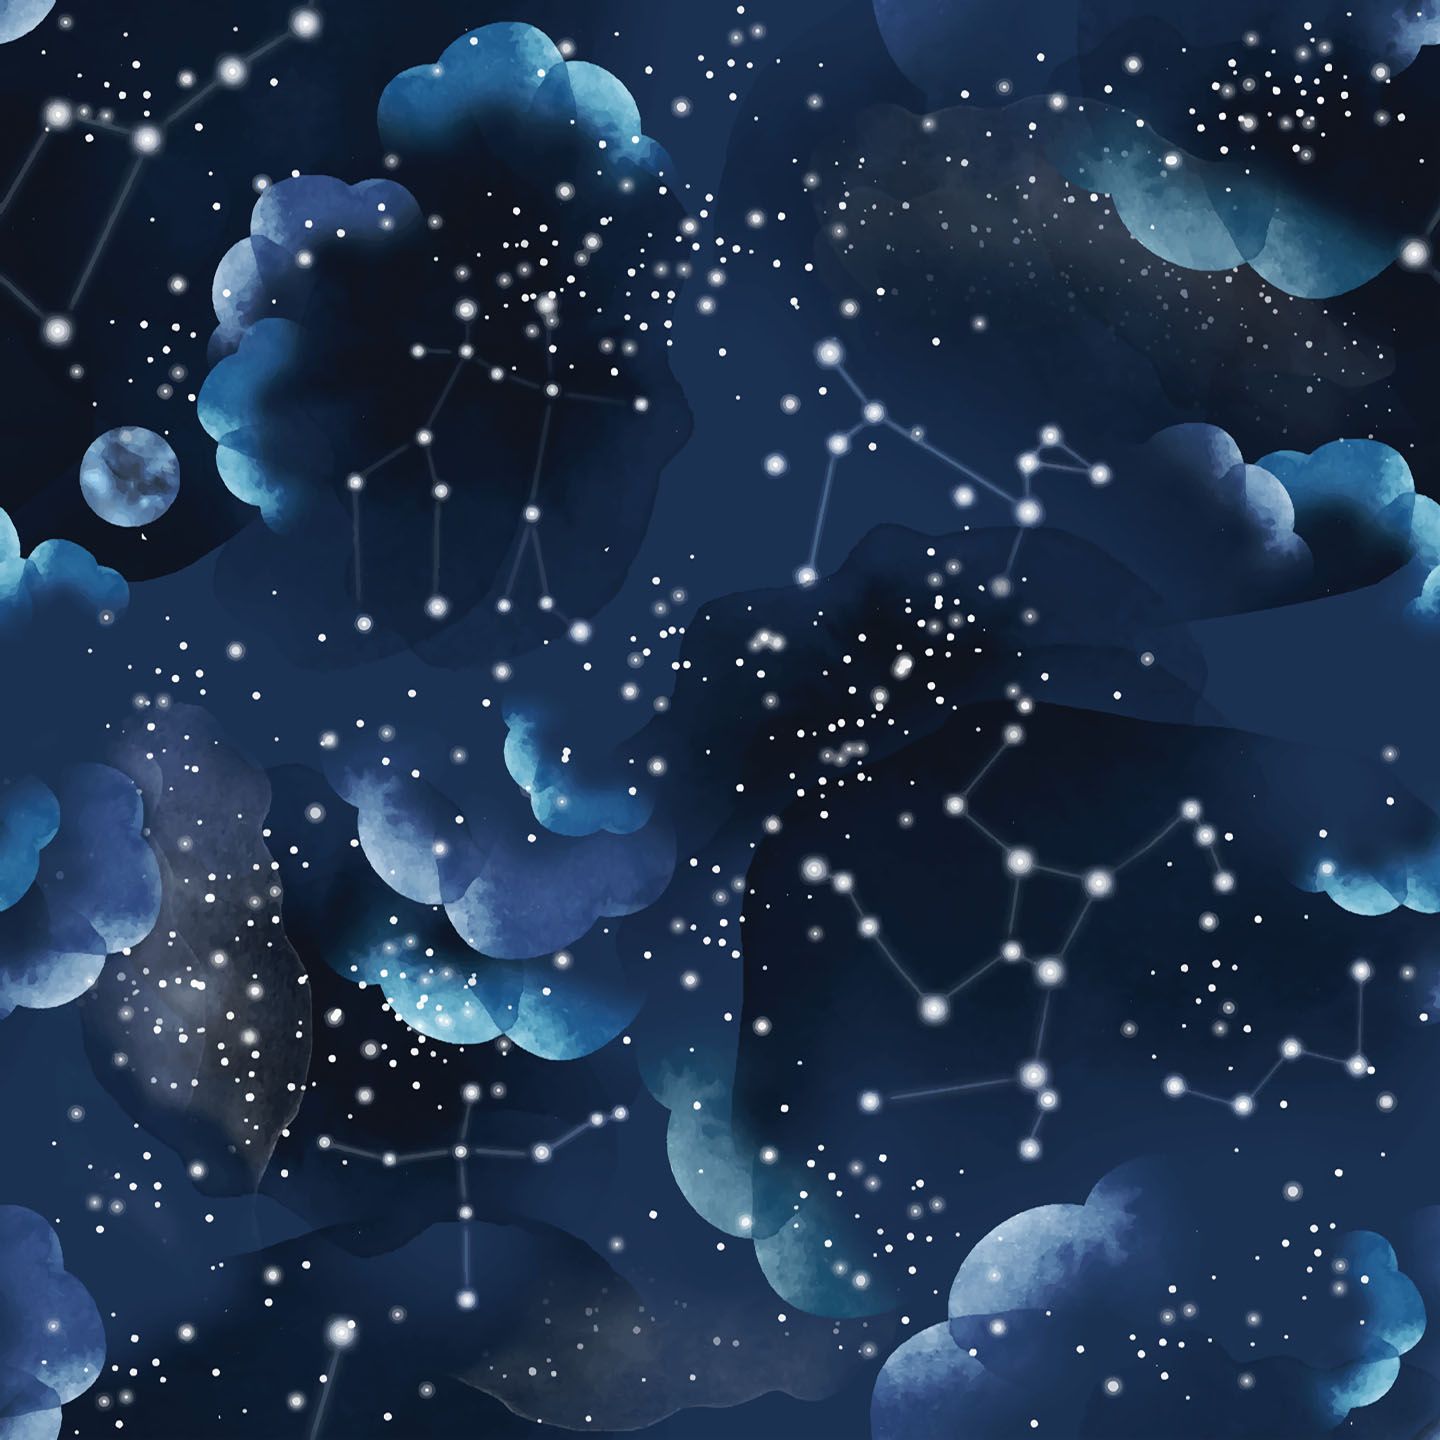 A dark blue background with white stars and constellations - Stars